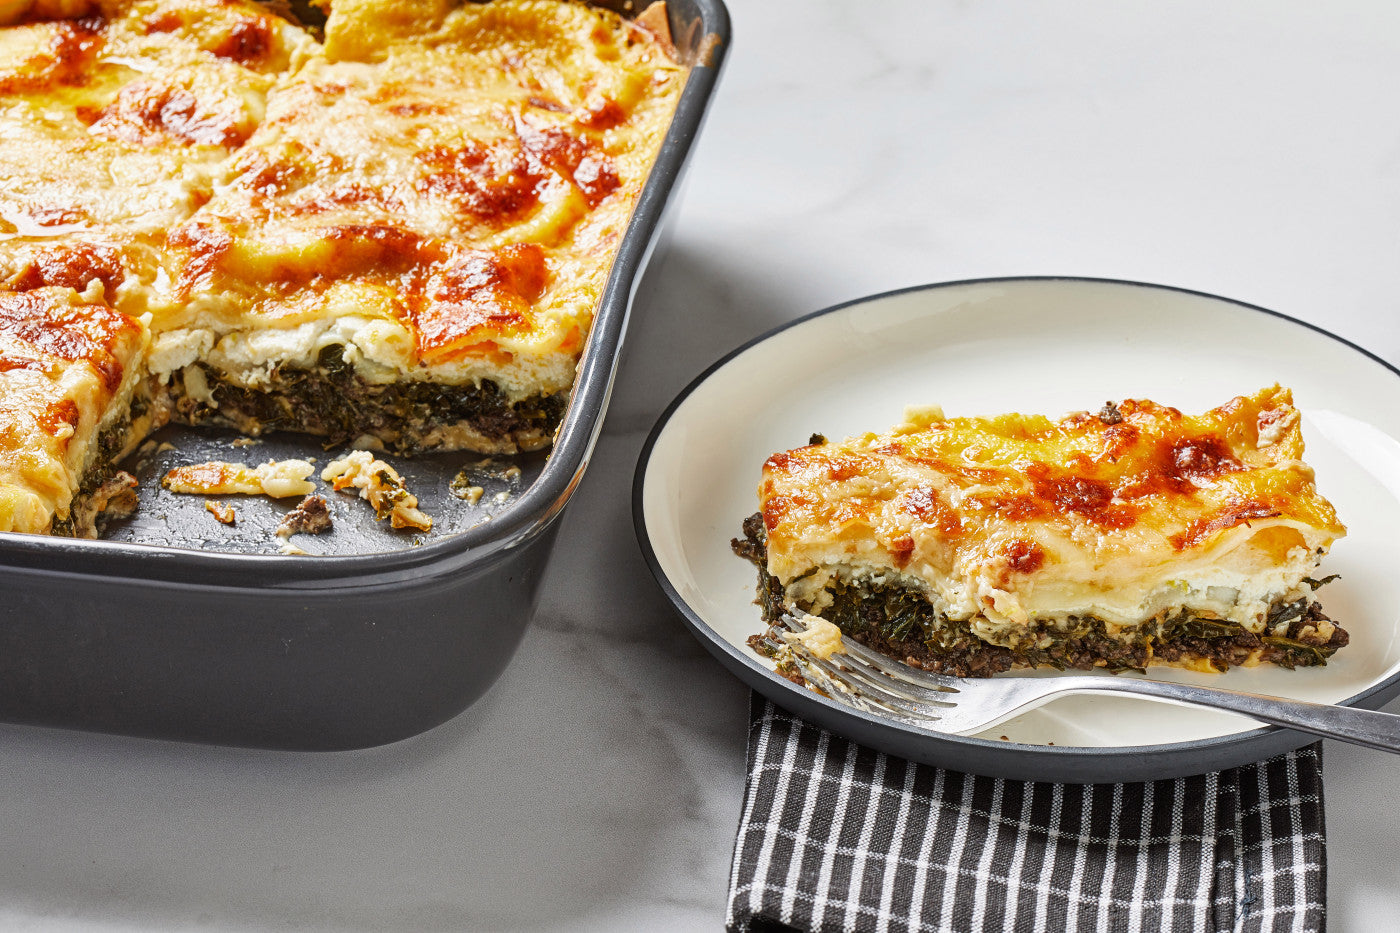 Here’s a hearty way to get your greens: In a cheesy pan of lasagna